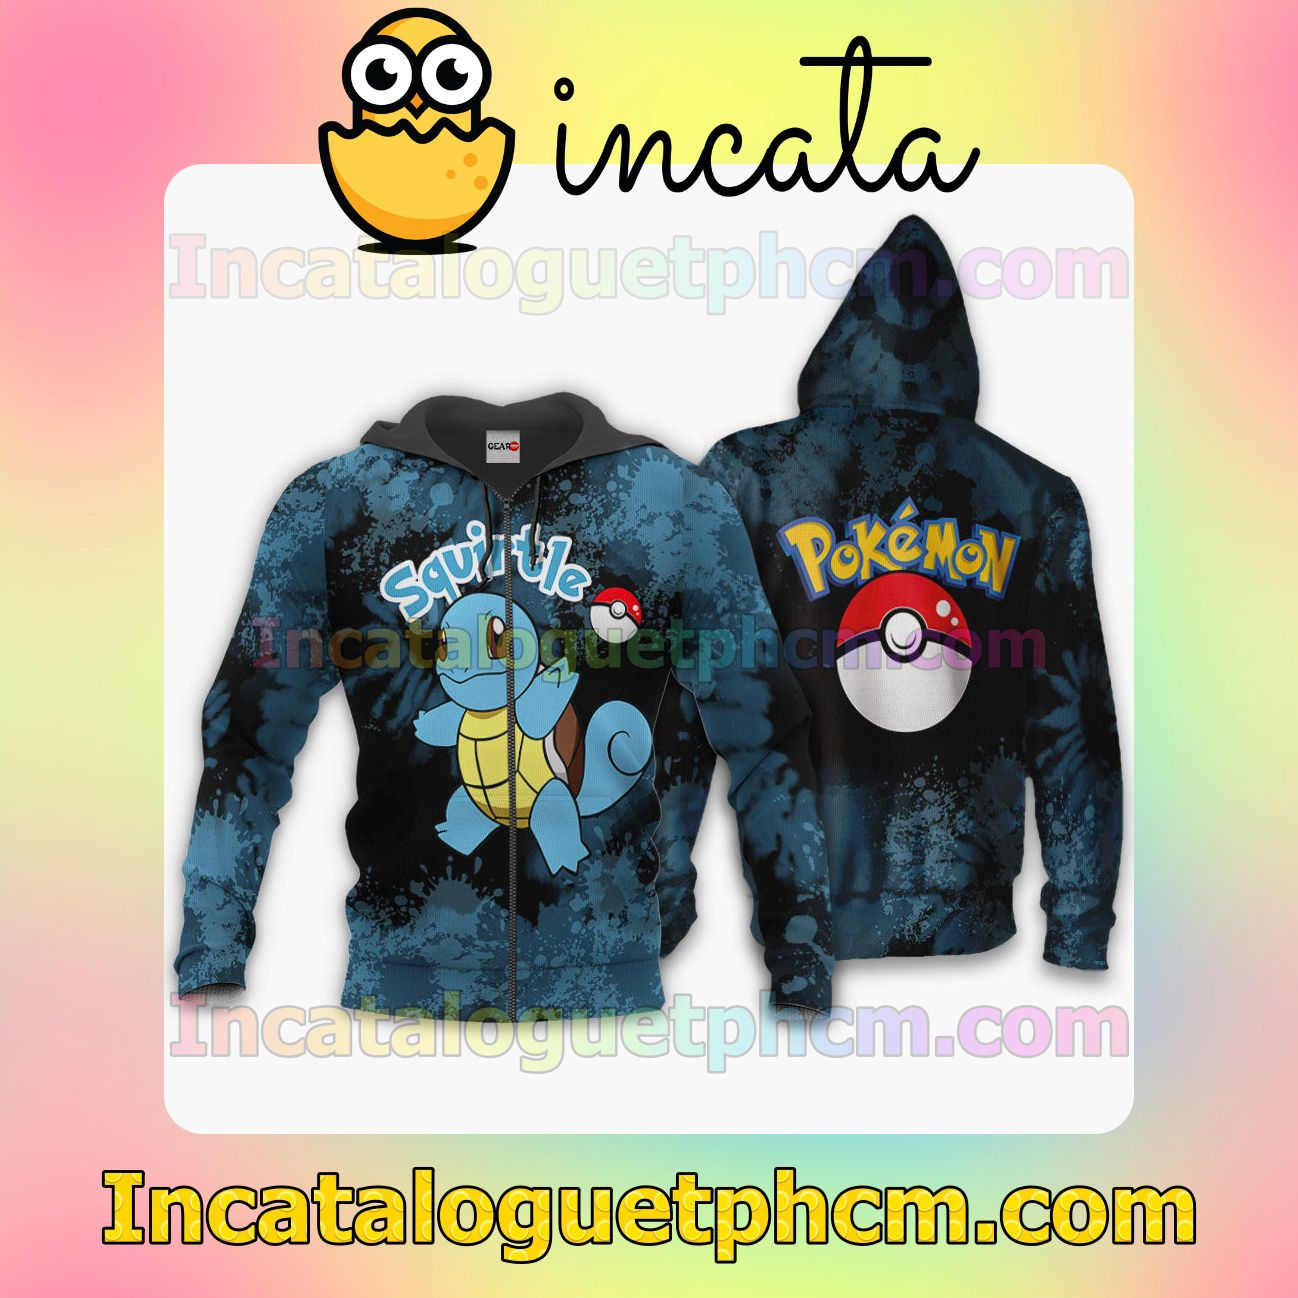 Squirtle Pokemon Anime Tie Dye Style Clothing Merch Zip Hoodie Jacket Shirts